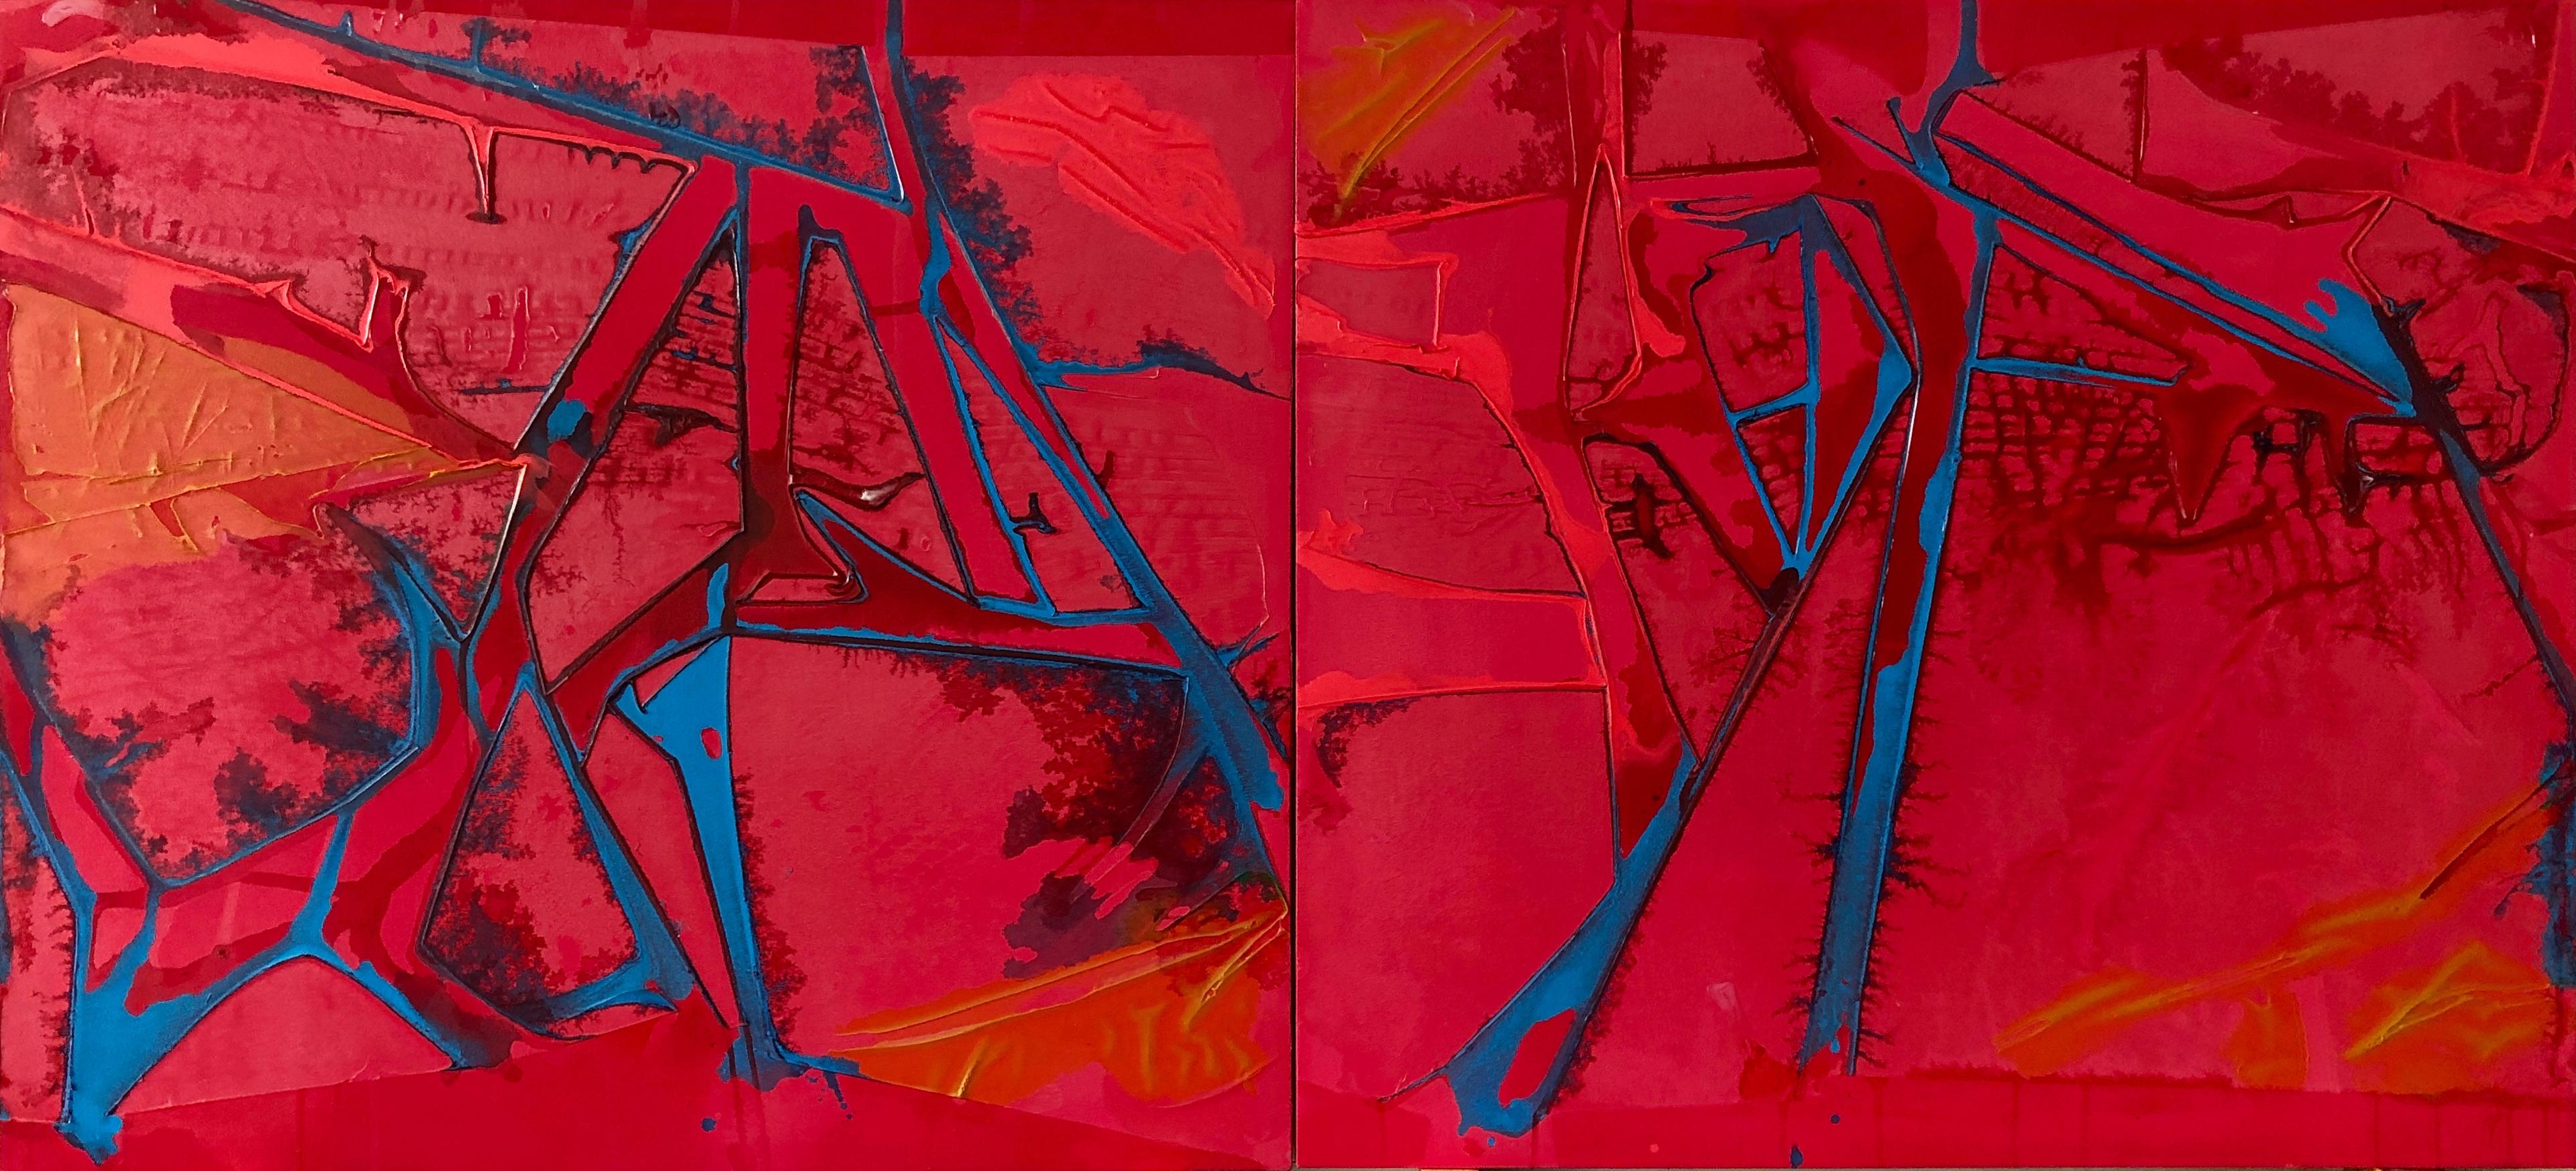 Jeffrey Kurland Landscape Painting - "TEARS OF RAGE", Abstract Painting, Diptych, Acrylic on Canvas, Red, Blue